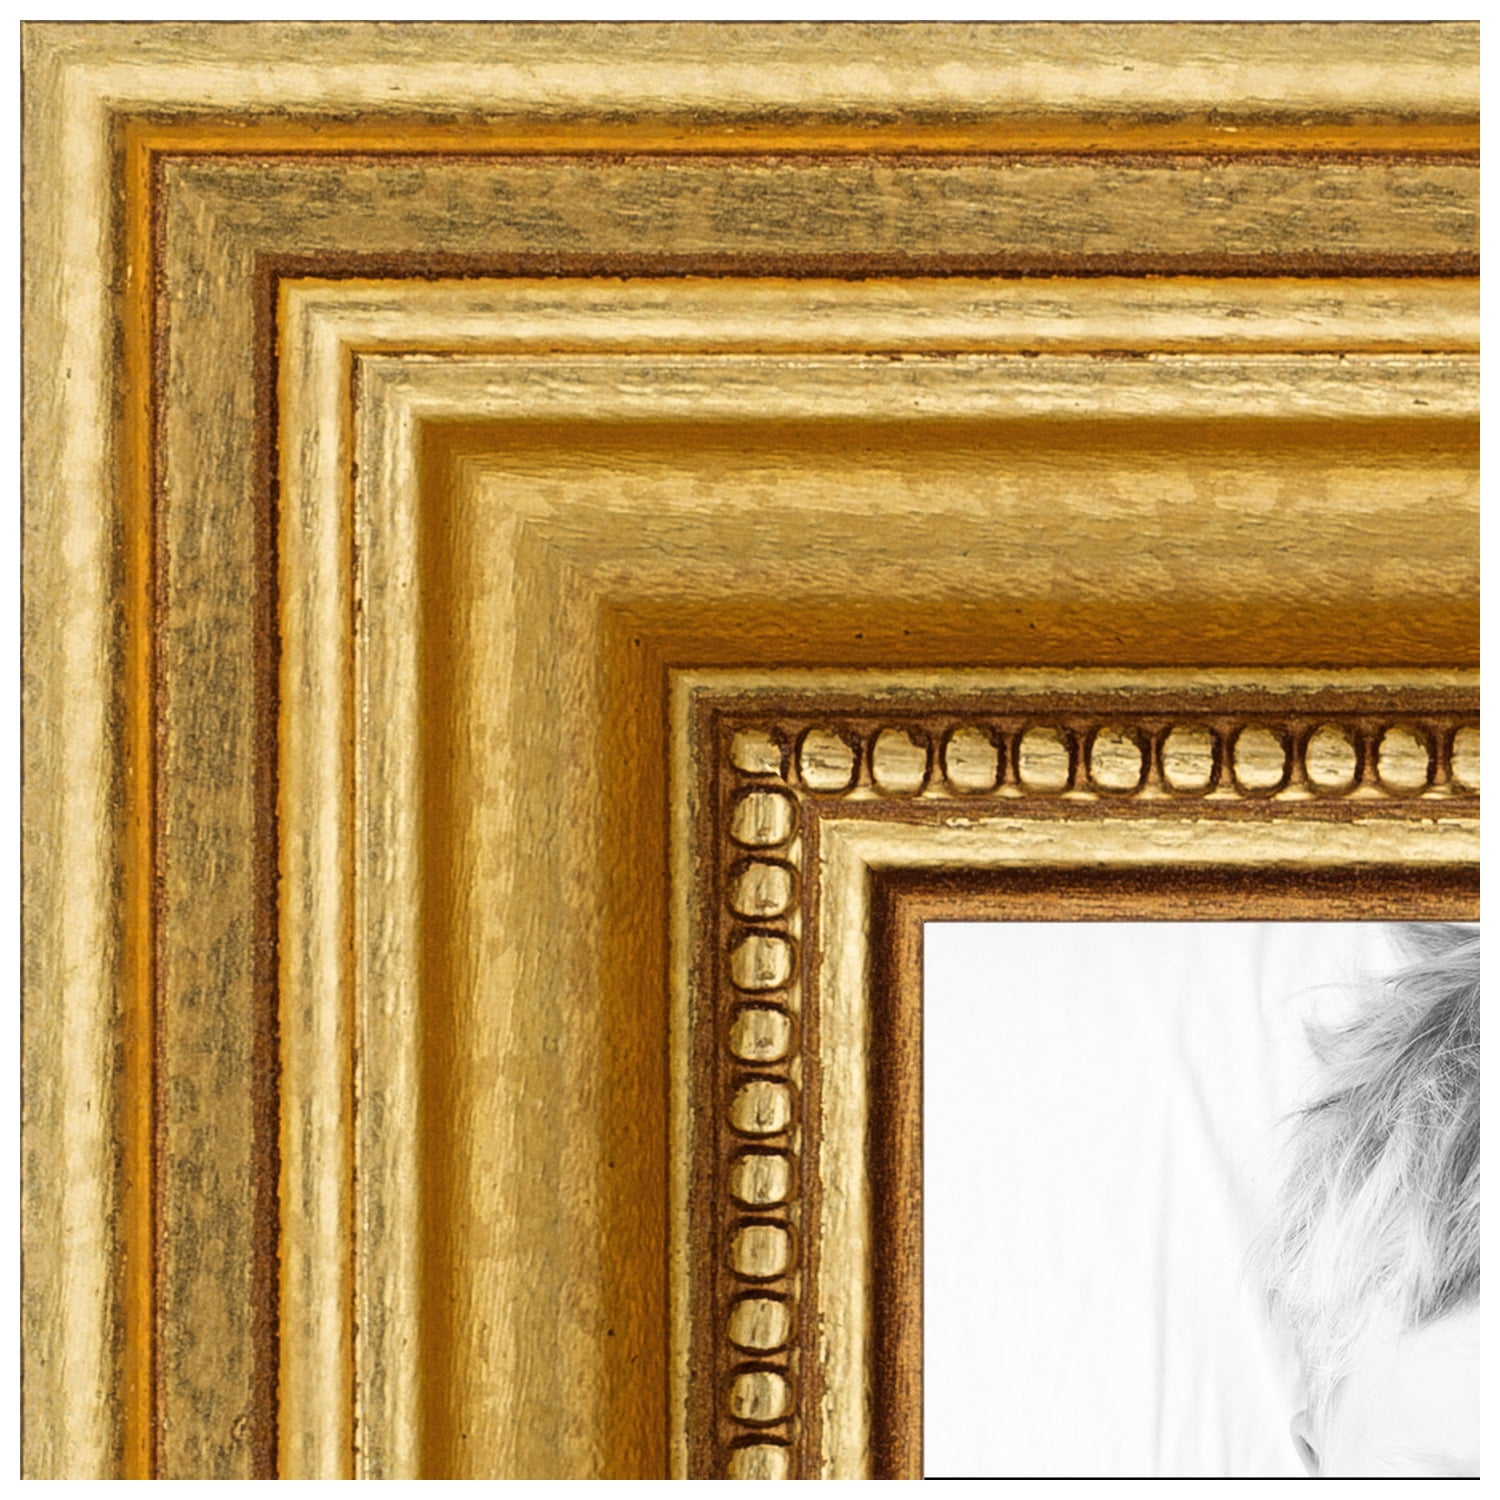 Size 11x14 inches Details about   Antique Gold Speckle Plein Air Wood Frame